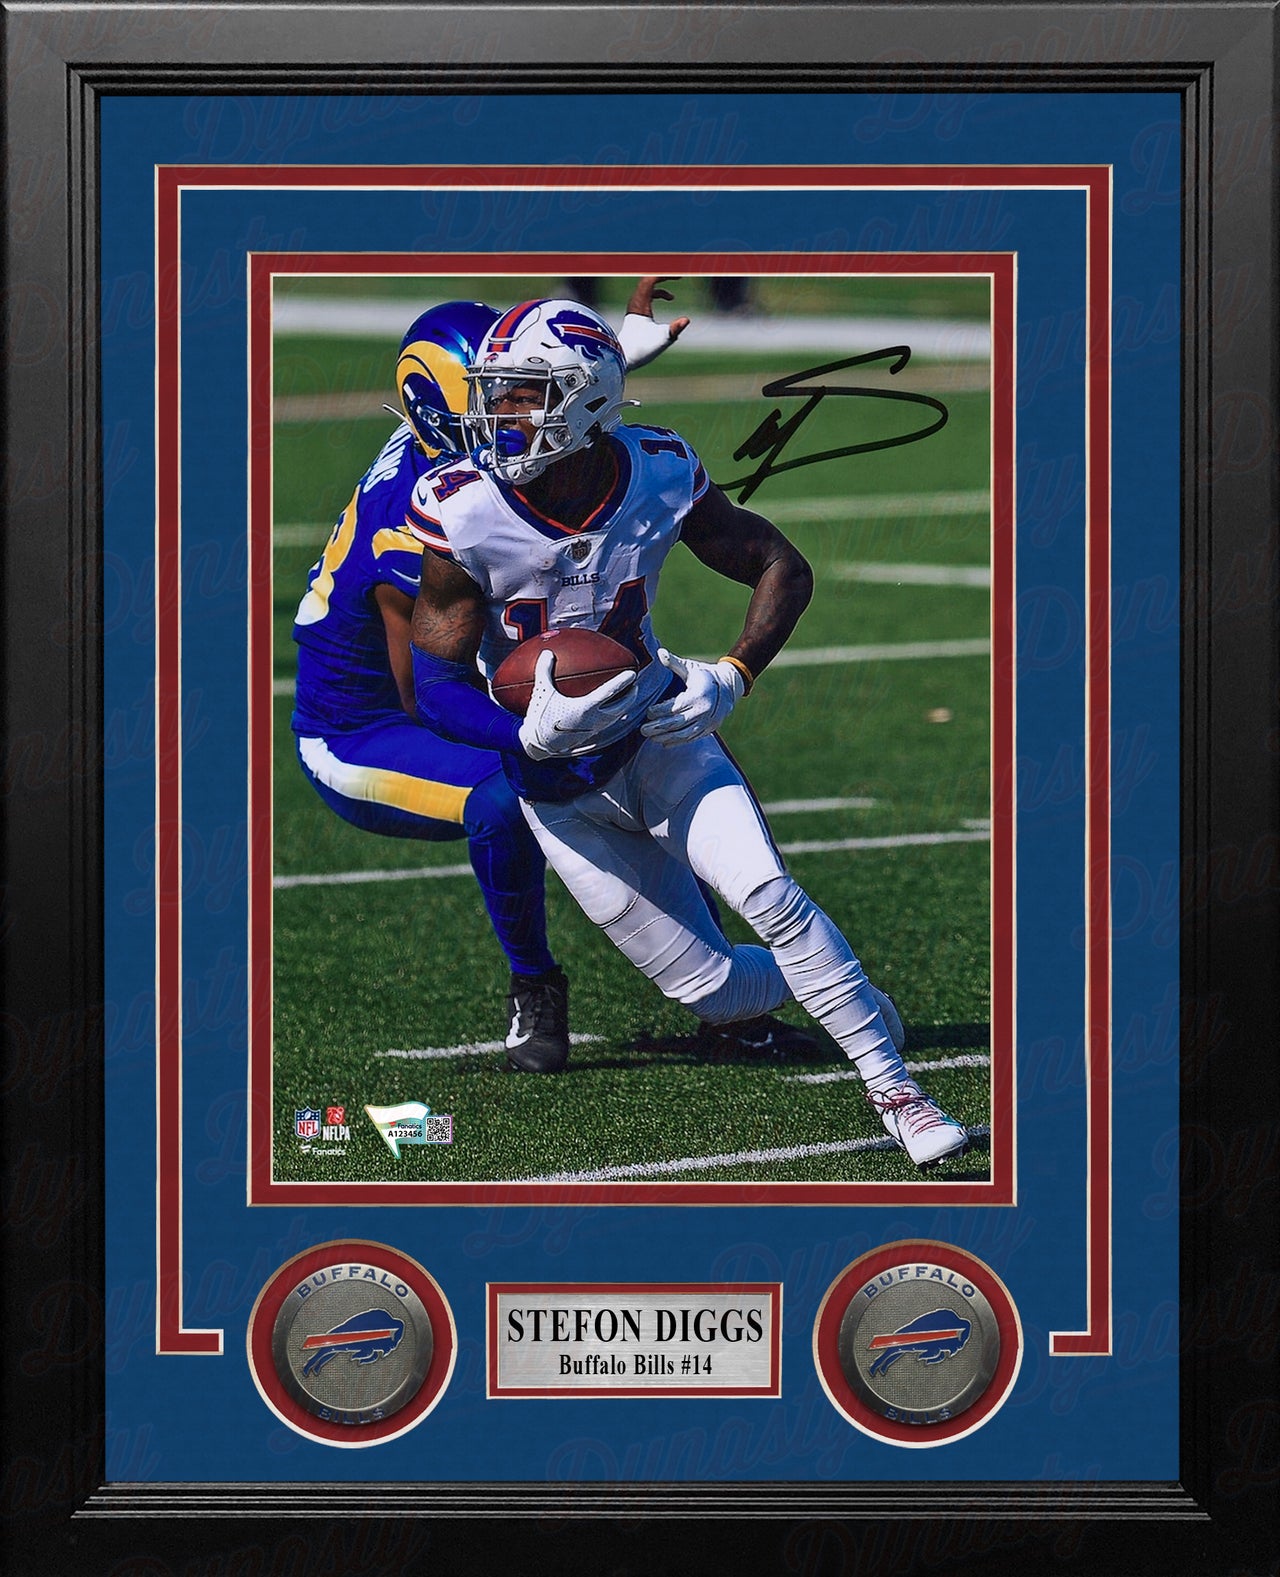 Stefon Diggs in Action Buffalo Bills Autographed 8" x 10" Framed Football Photo - Dynasty Sports & Framing 